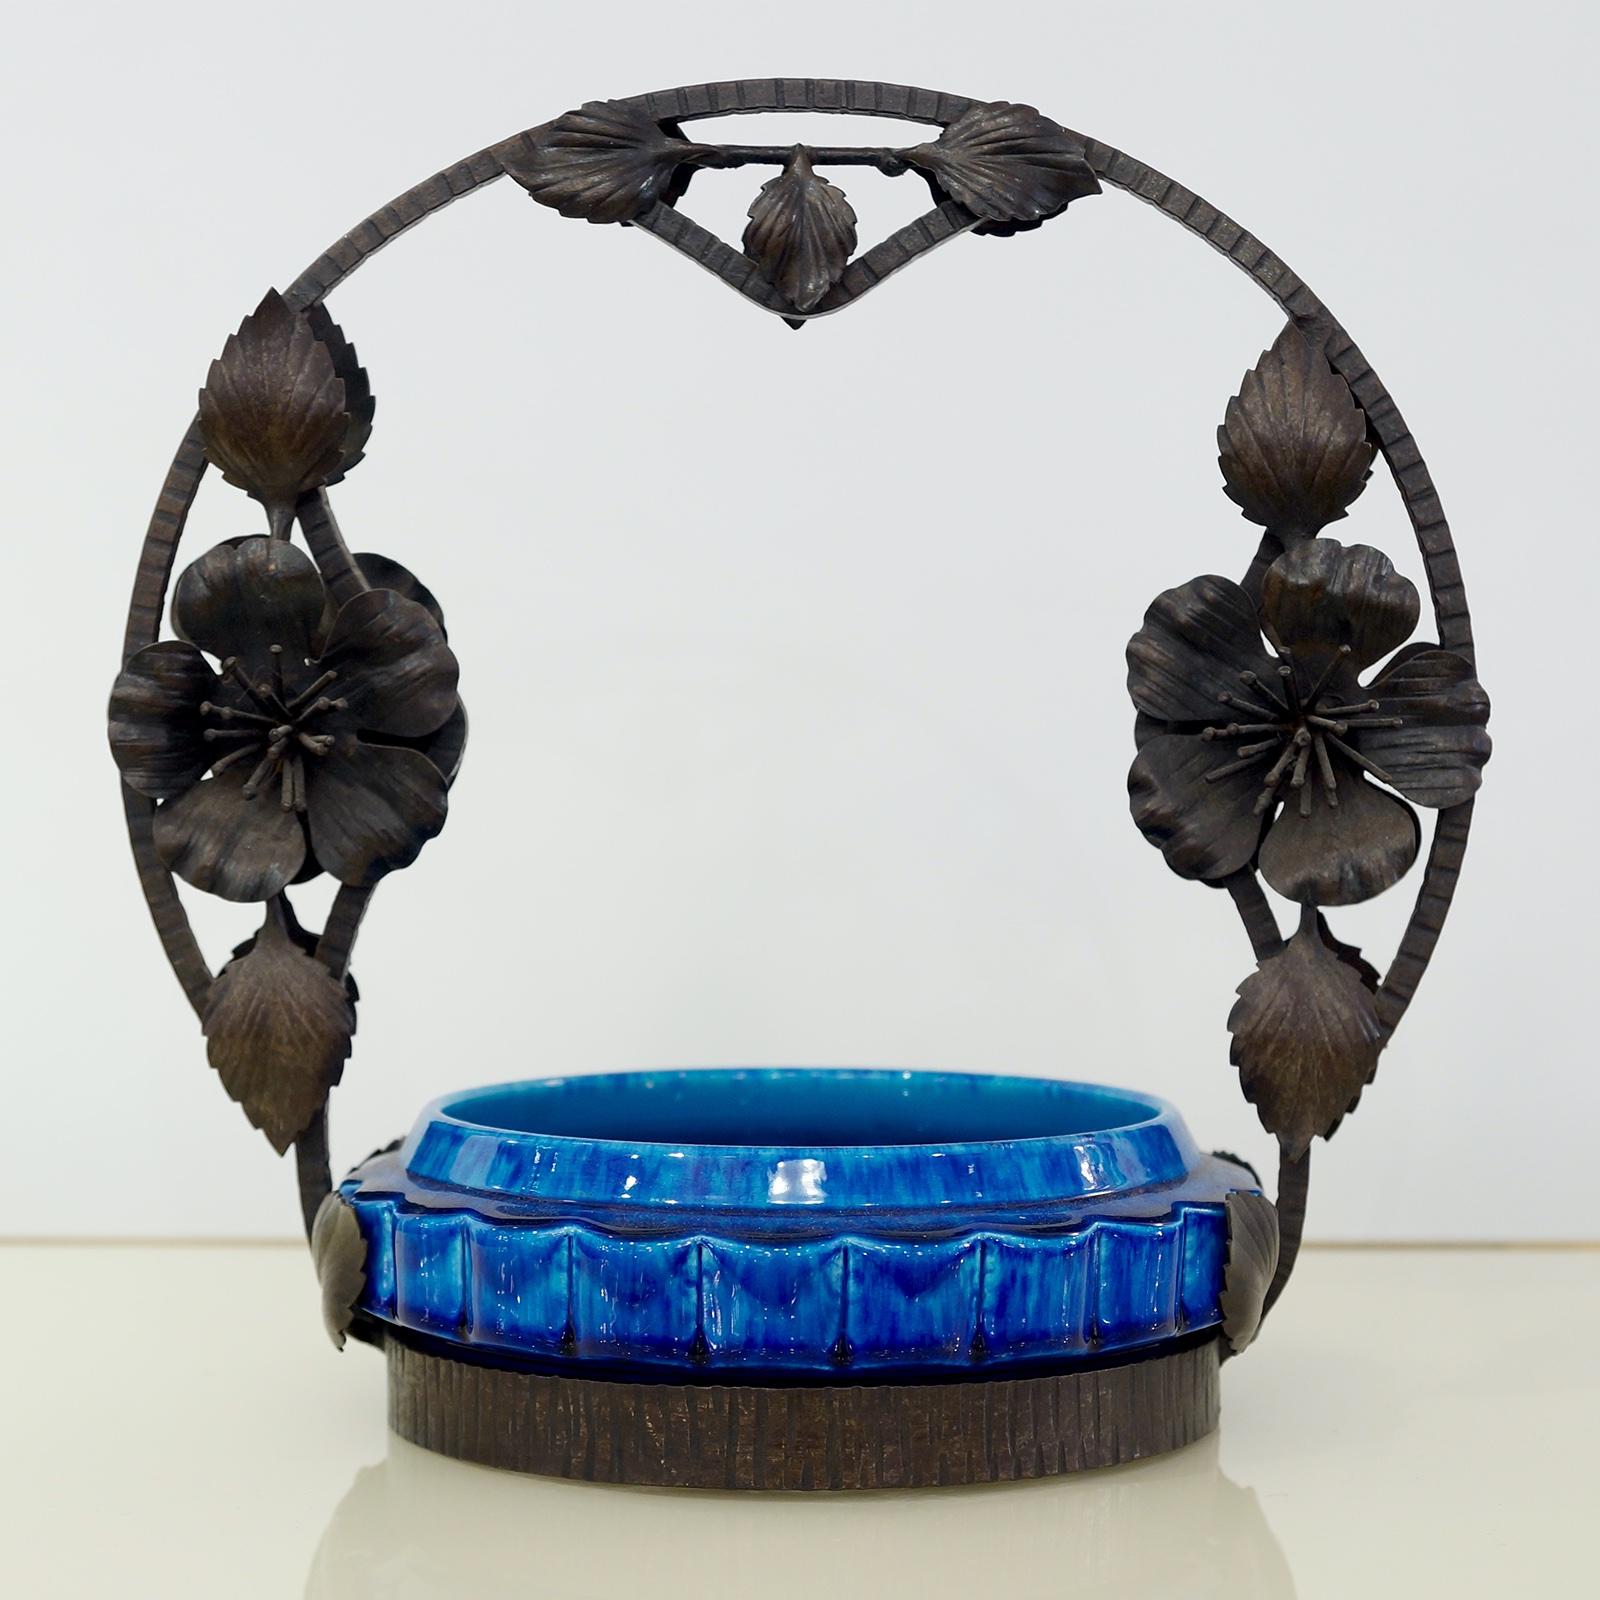 Cirac 1910, unique Art Nouveau bowl compote decorated like a summer basket with a wrought black iron handle decorated with nicely detailed flowers and leaves. The bowl in ceramic vibrant turquoise tint blue Sevres enamel glaze is detachable, signed